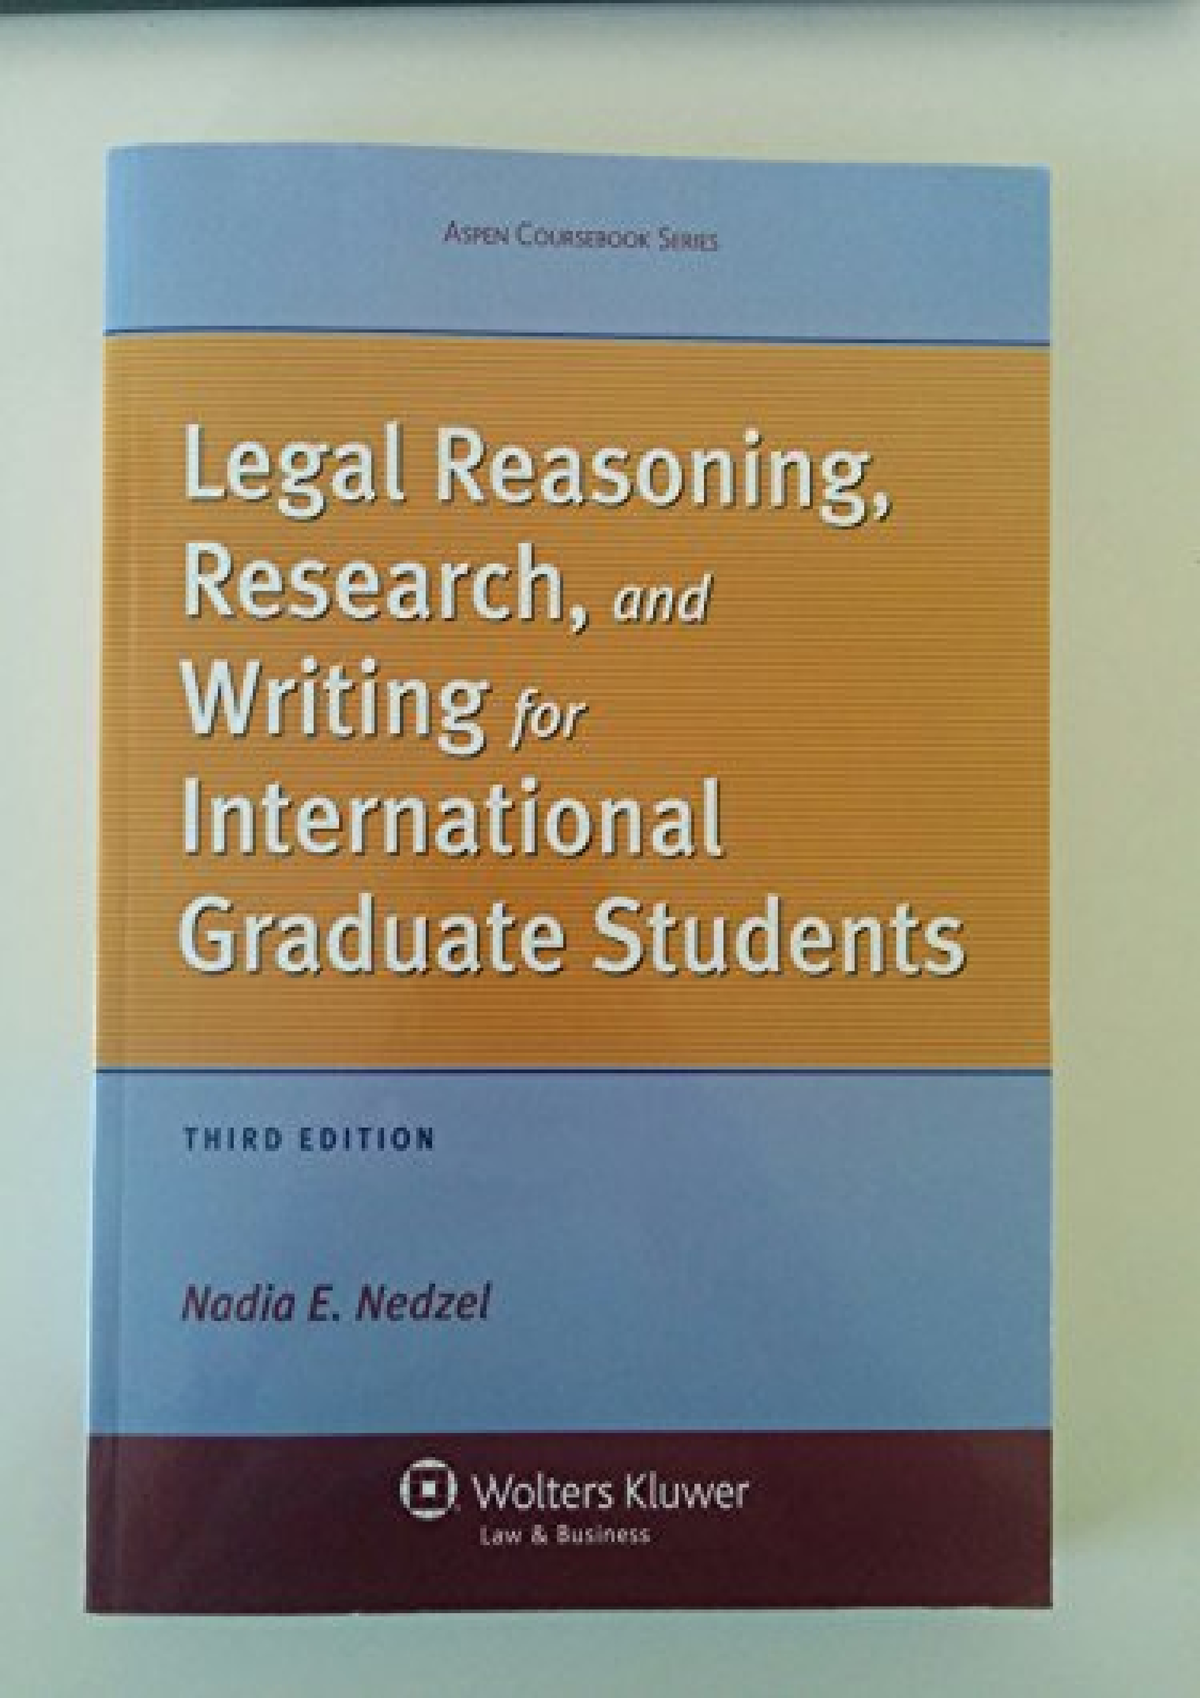 legal reasoning research and writing for international graduate students pdf